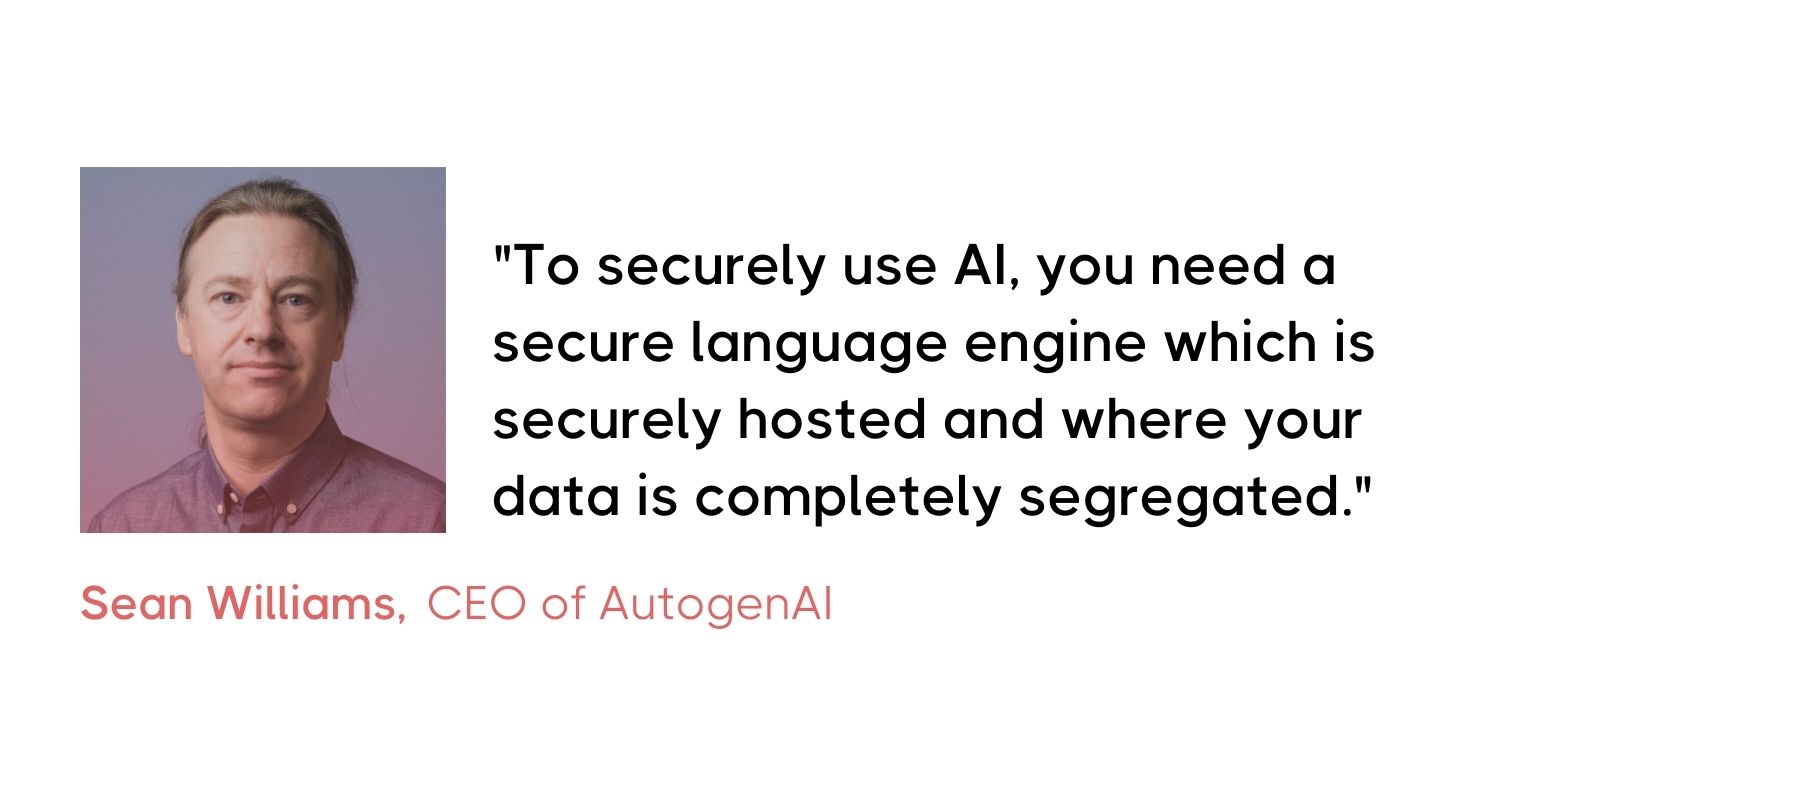 Promotional graphic featuring Sean Williams, CEO of AutogenAI. It includes a headshot of Sean, a Caucasian man with shoulder-length blonde hair, wearing a button-down shirt. To his right, a quote reads: 'To securely use AI, you need a secure language engine which is securely hosted and where your data is completely segregated.' The quote highlights the importance of data security in AI usage.